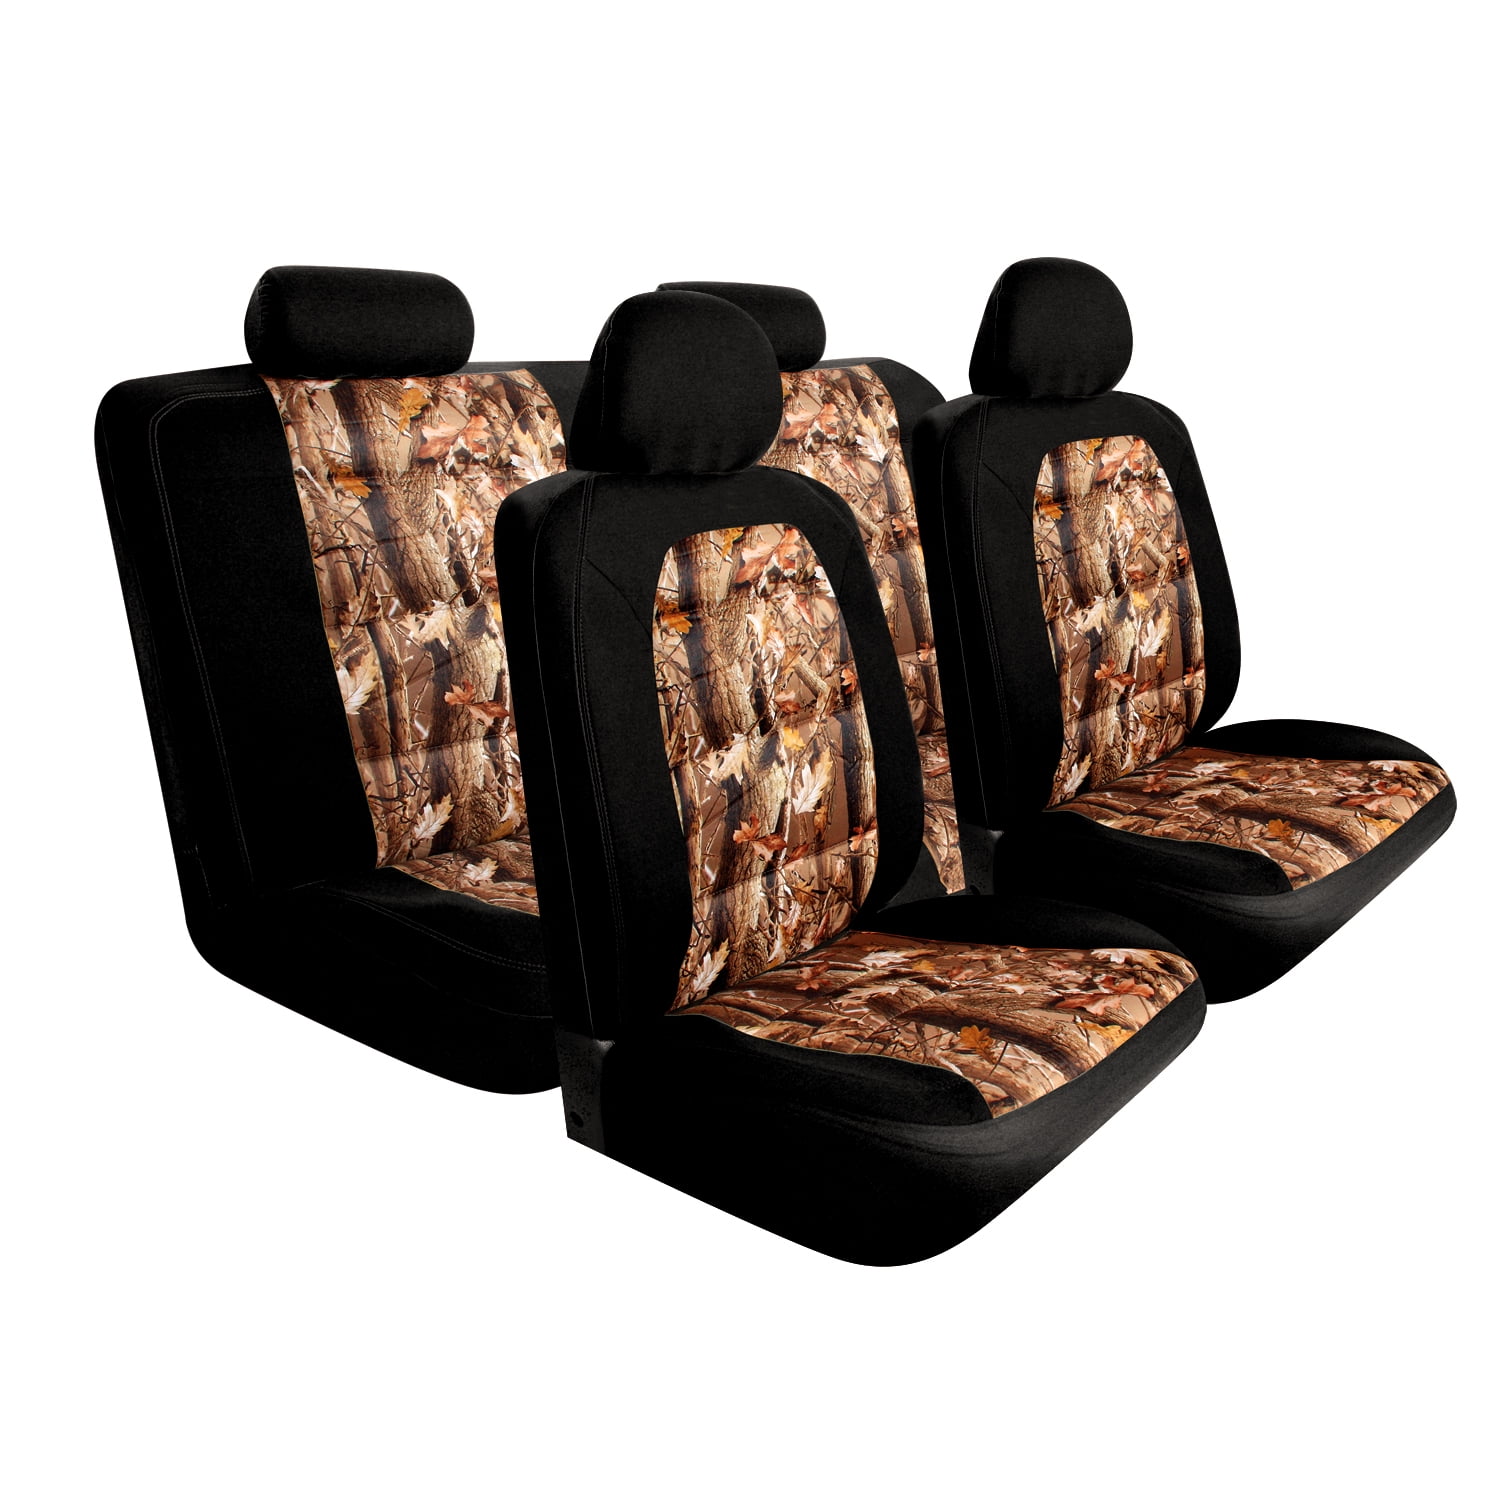 TOYOUN Camo Universal Front Car Seat Covers Waterproof Highback Bucket Seat  Covers Green Forest Camouflage Print-Fit Most Cars, Trucks, SUVS, Vans 2